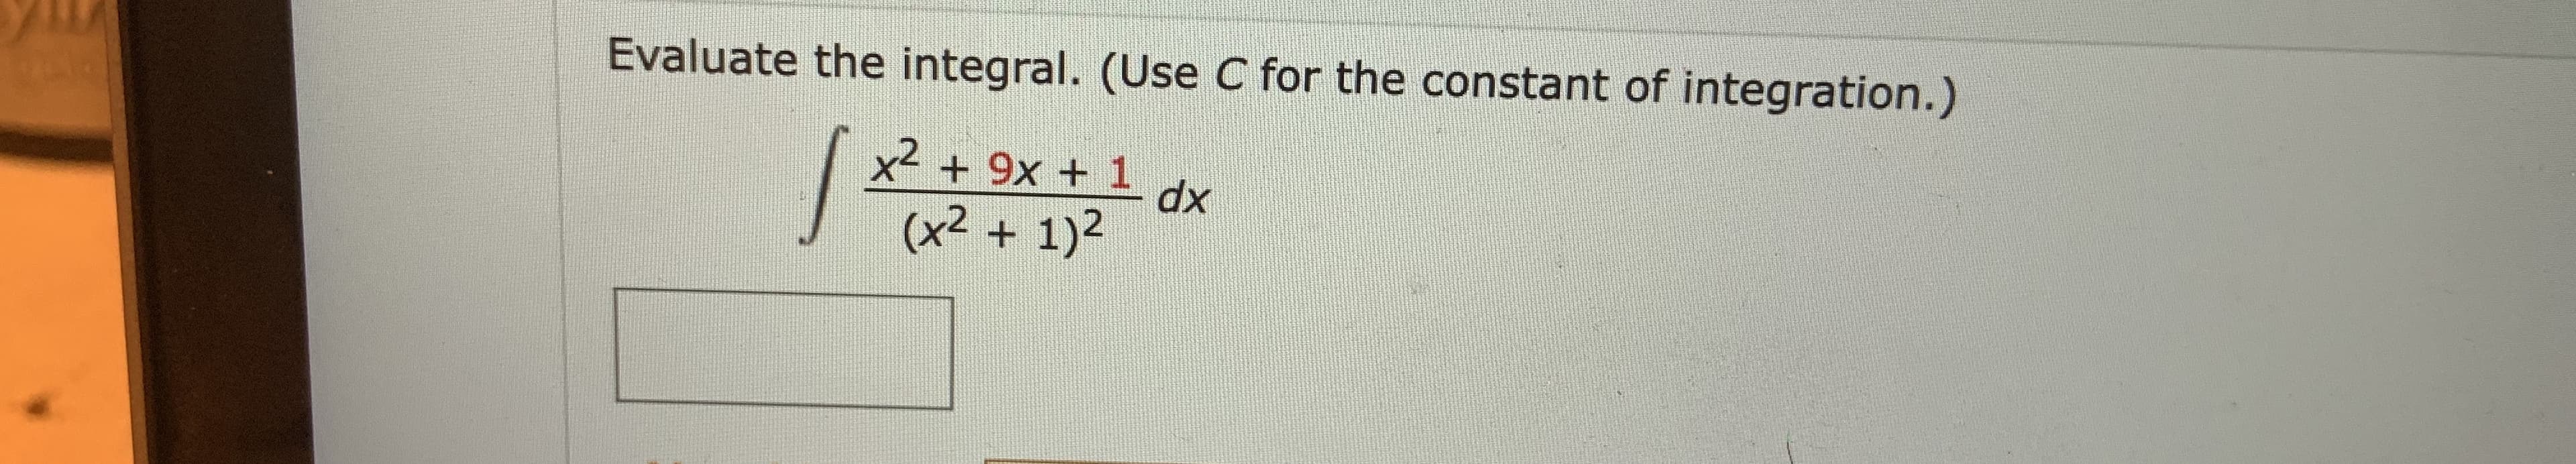 Evaluate the integral. (Use C for the constant of integration.)
x² + 9x + 1
dx
(x² + 1)2
